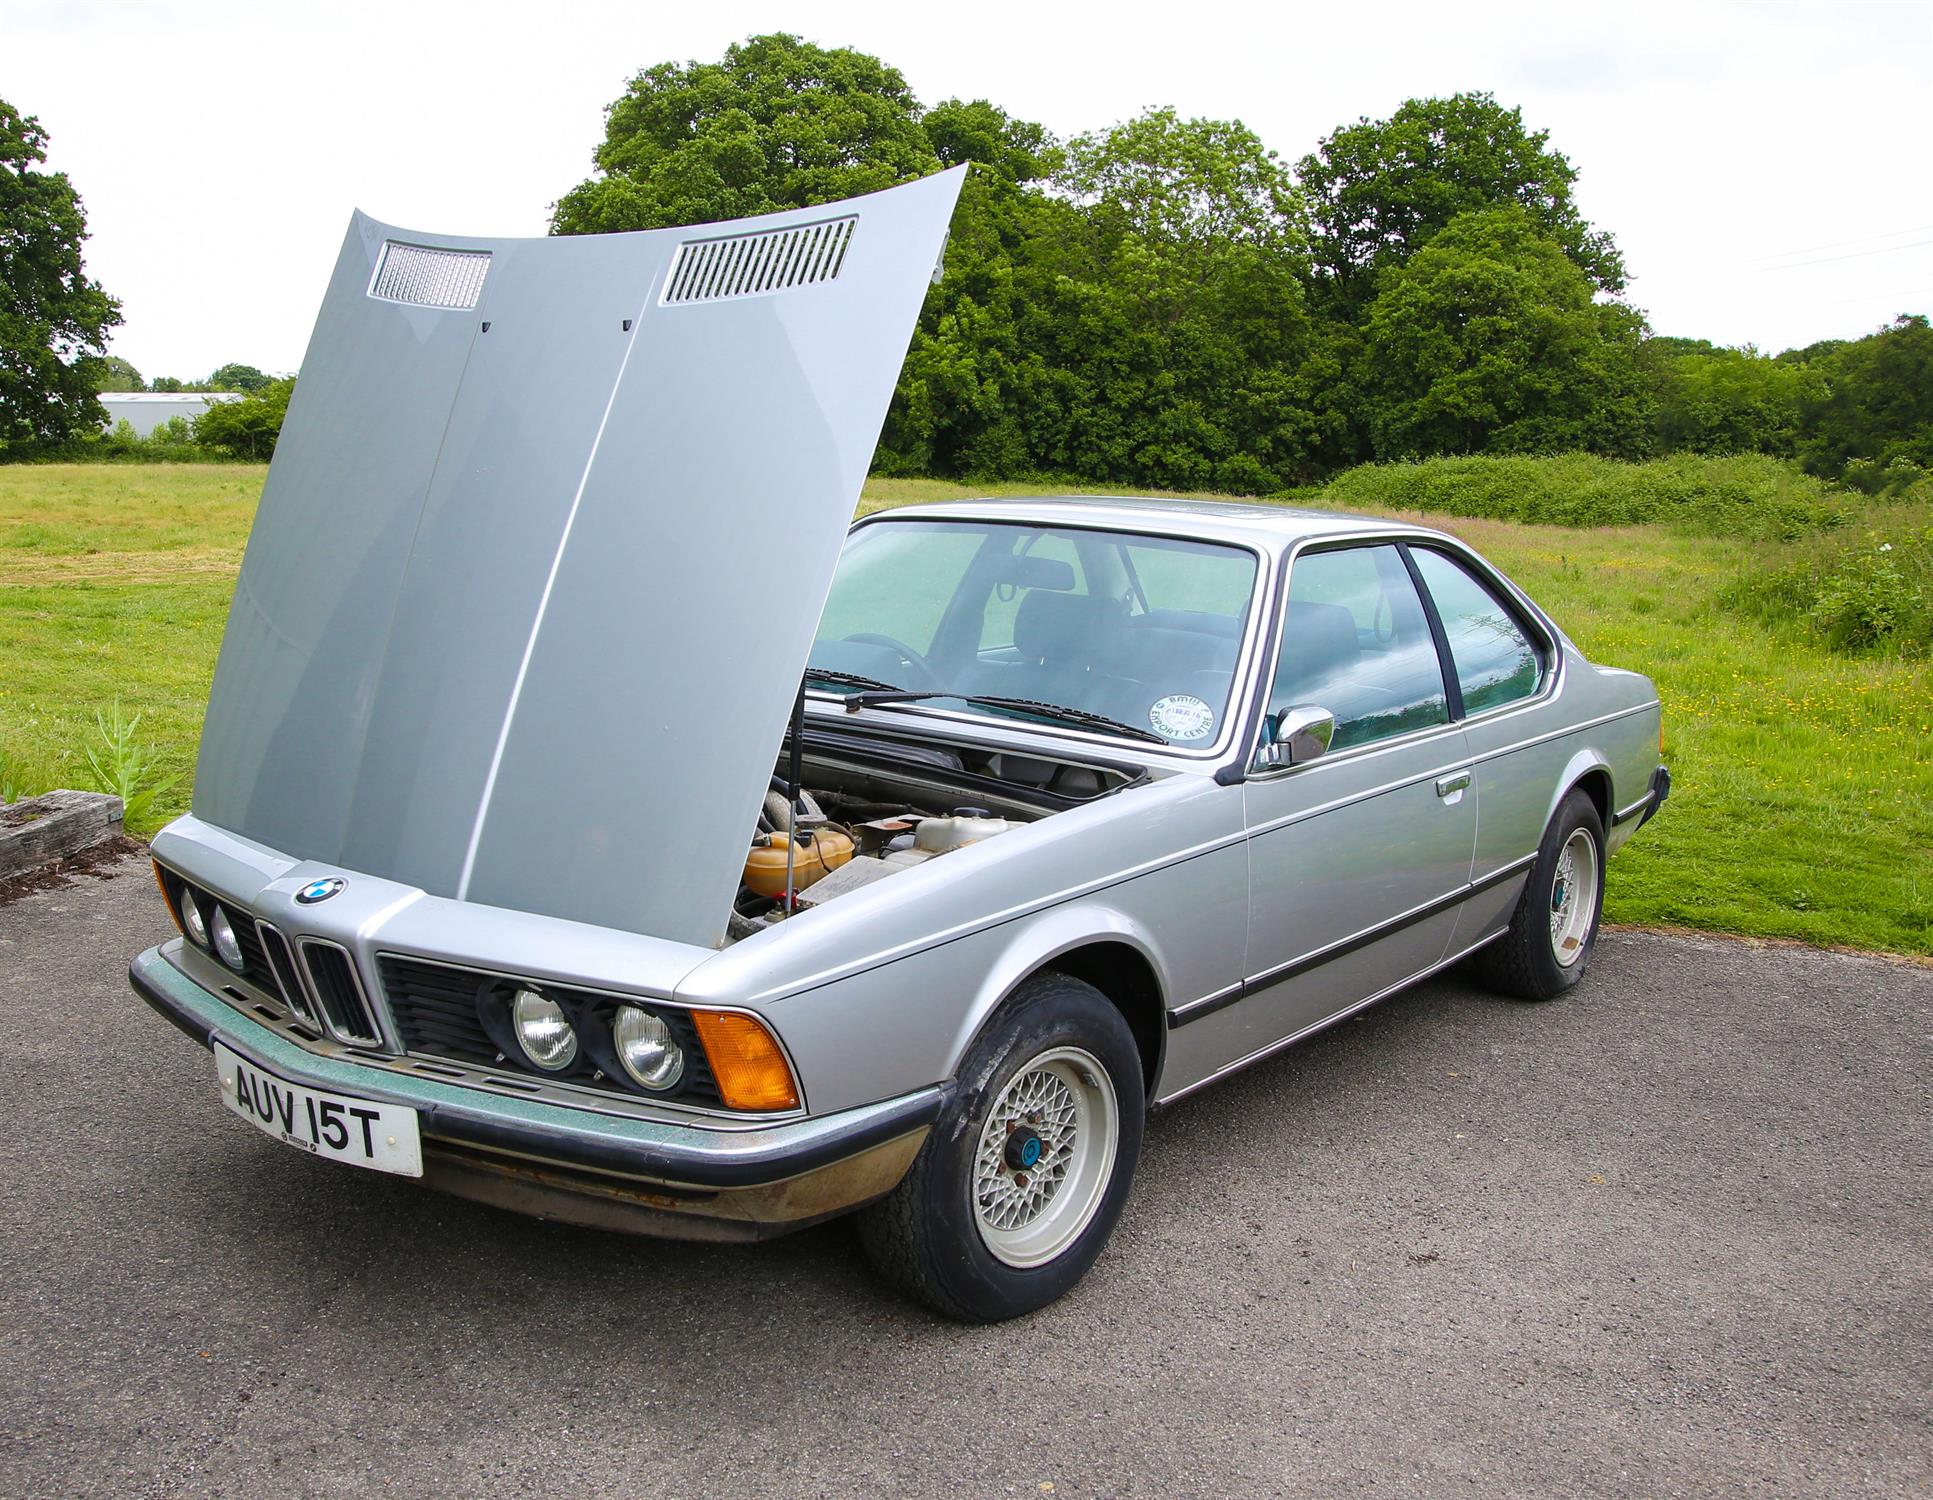 1979 BMW 633csi for Restoration/Recommissioning. Registration number AUV 15T Metallic Silver - Image 3 of 9